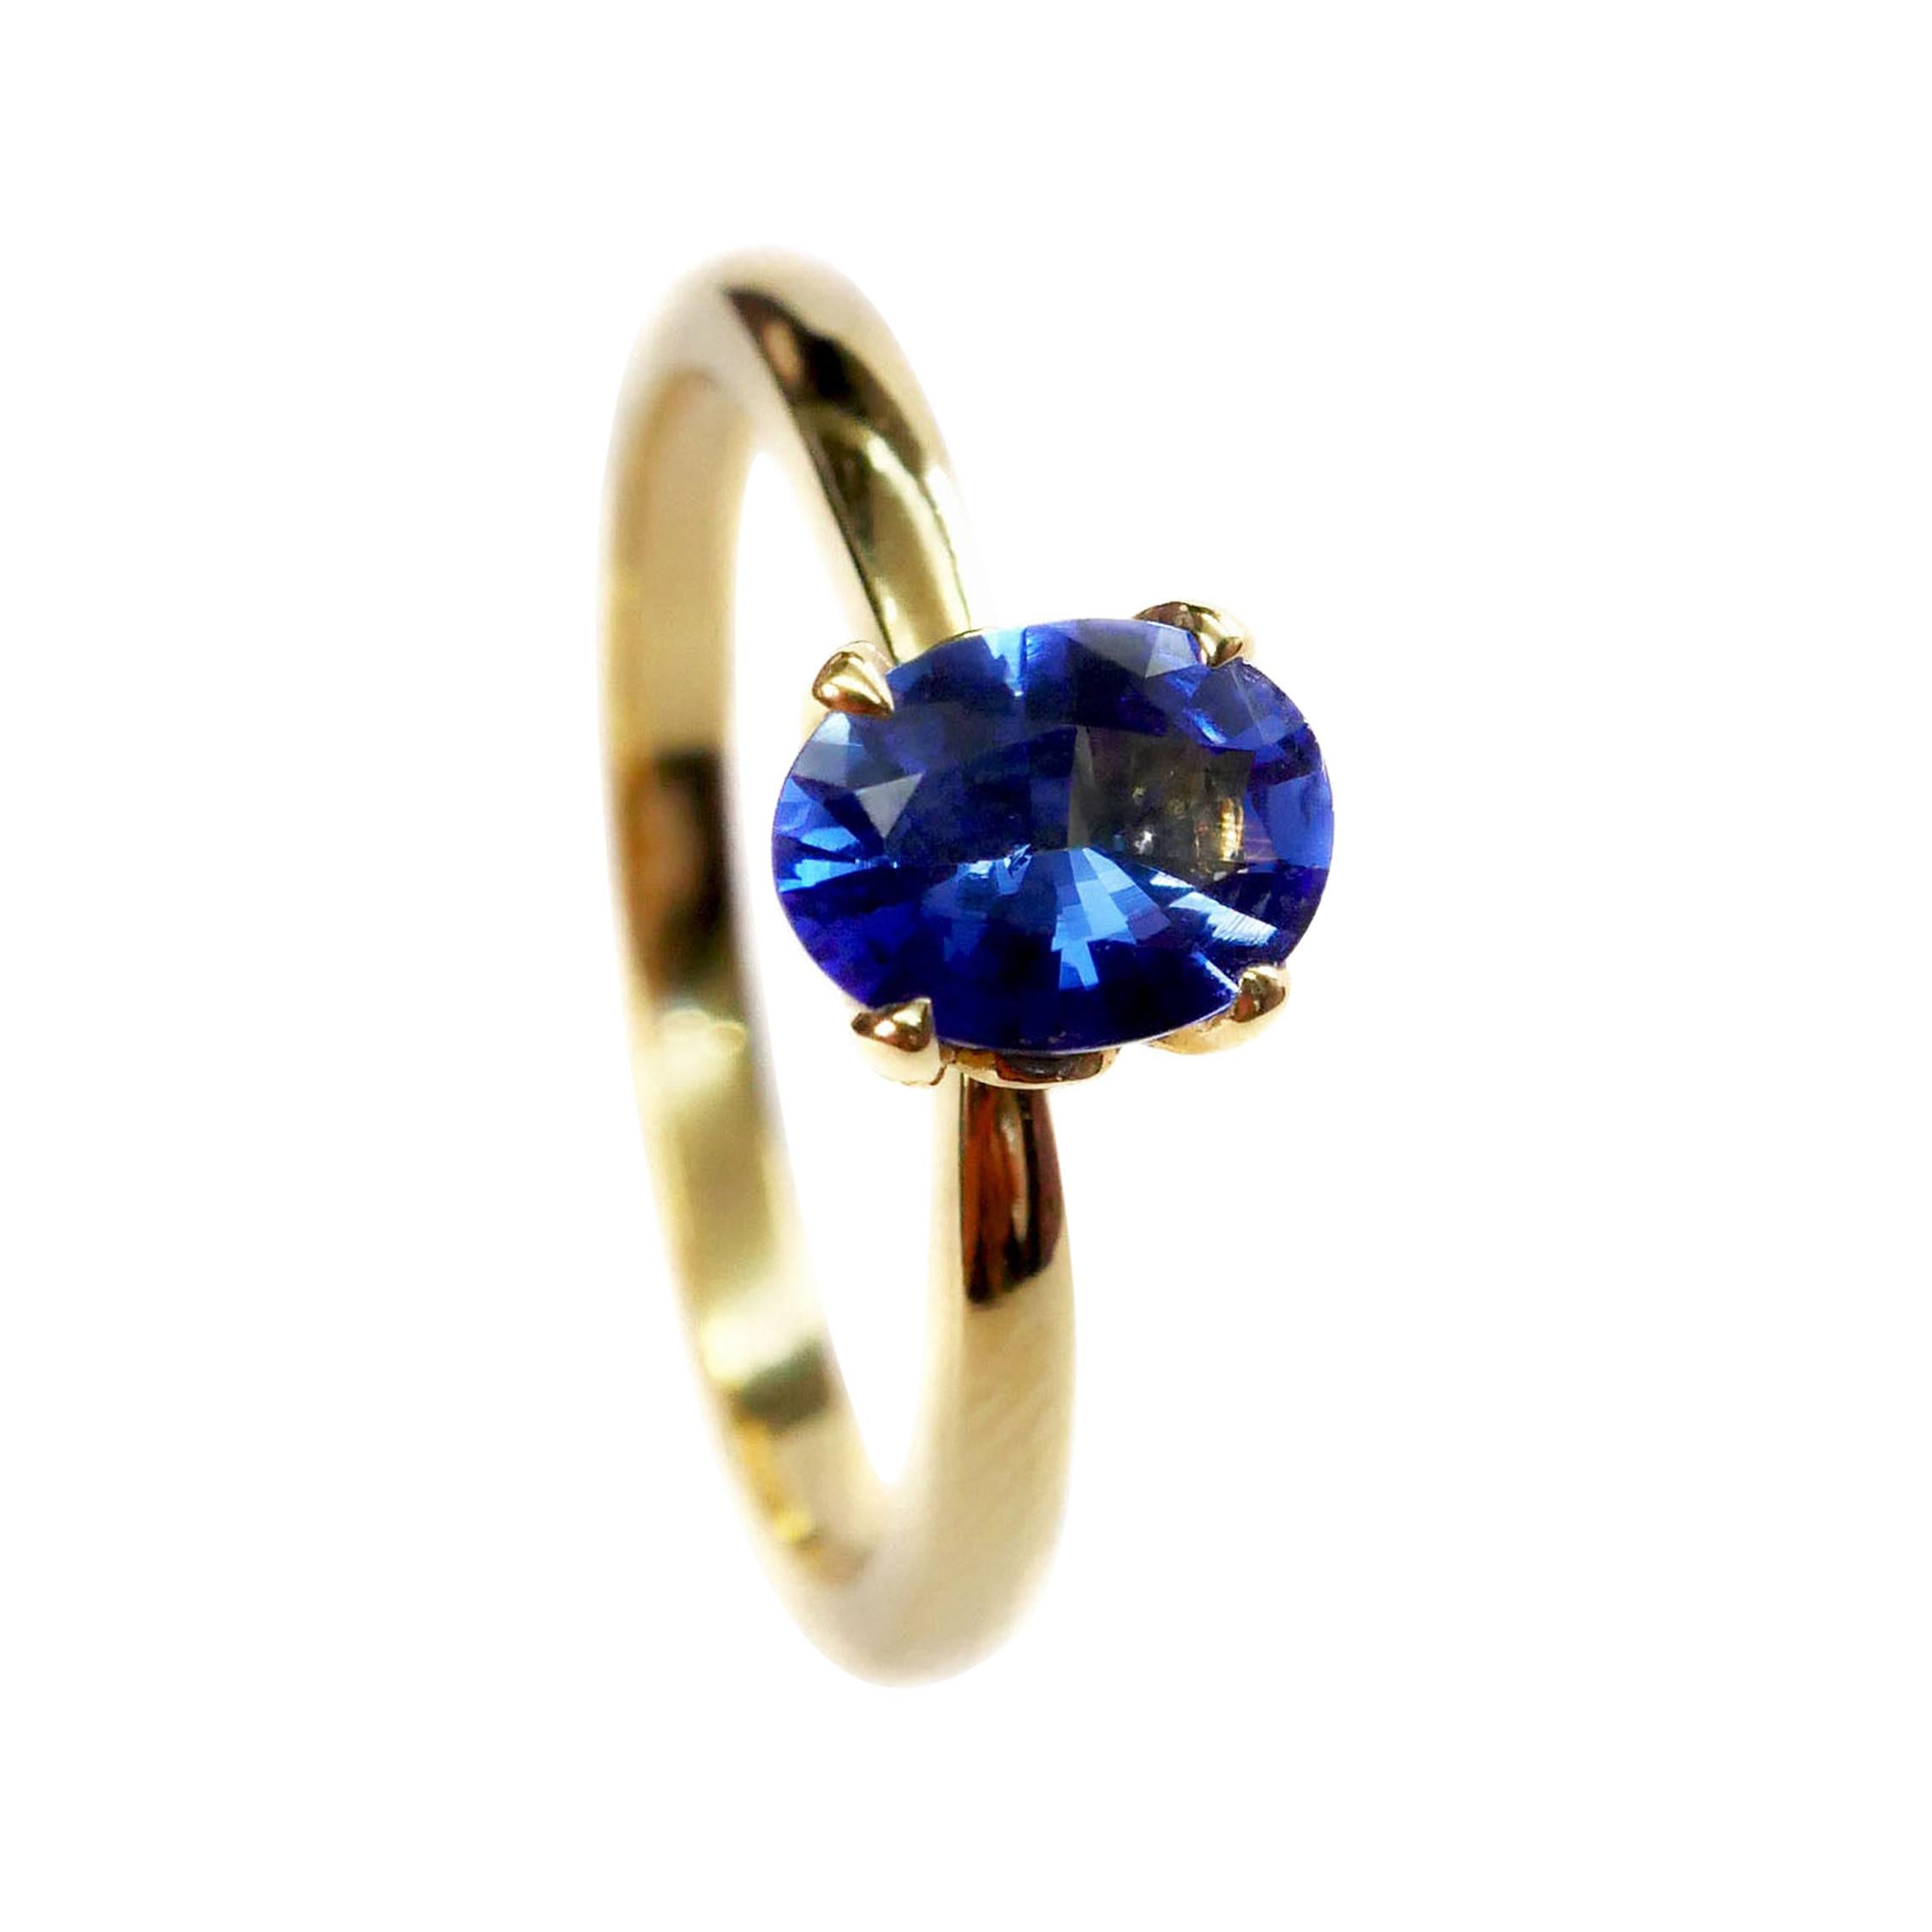 For Sale:  Blue Sapphire Solitaire Ring in 18 Karat Yellow Gold